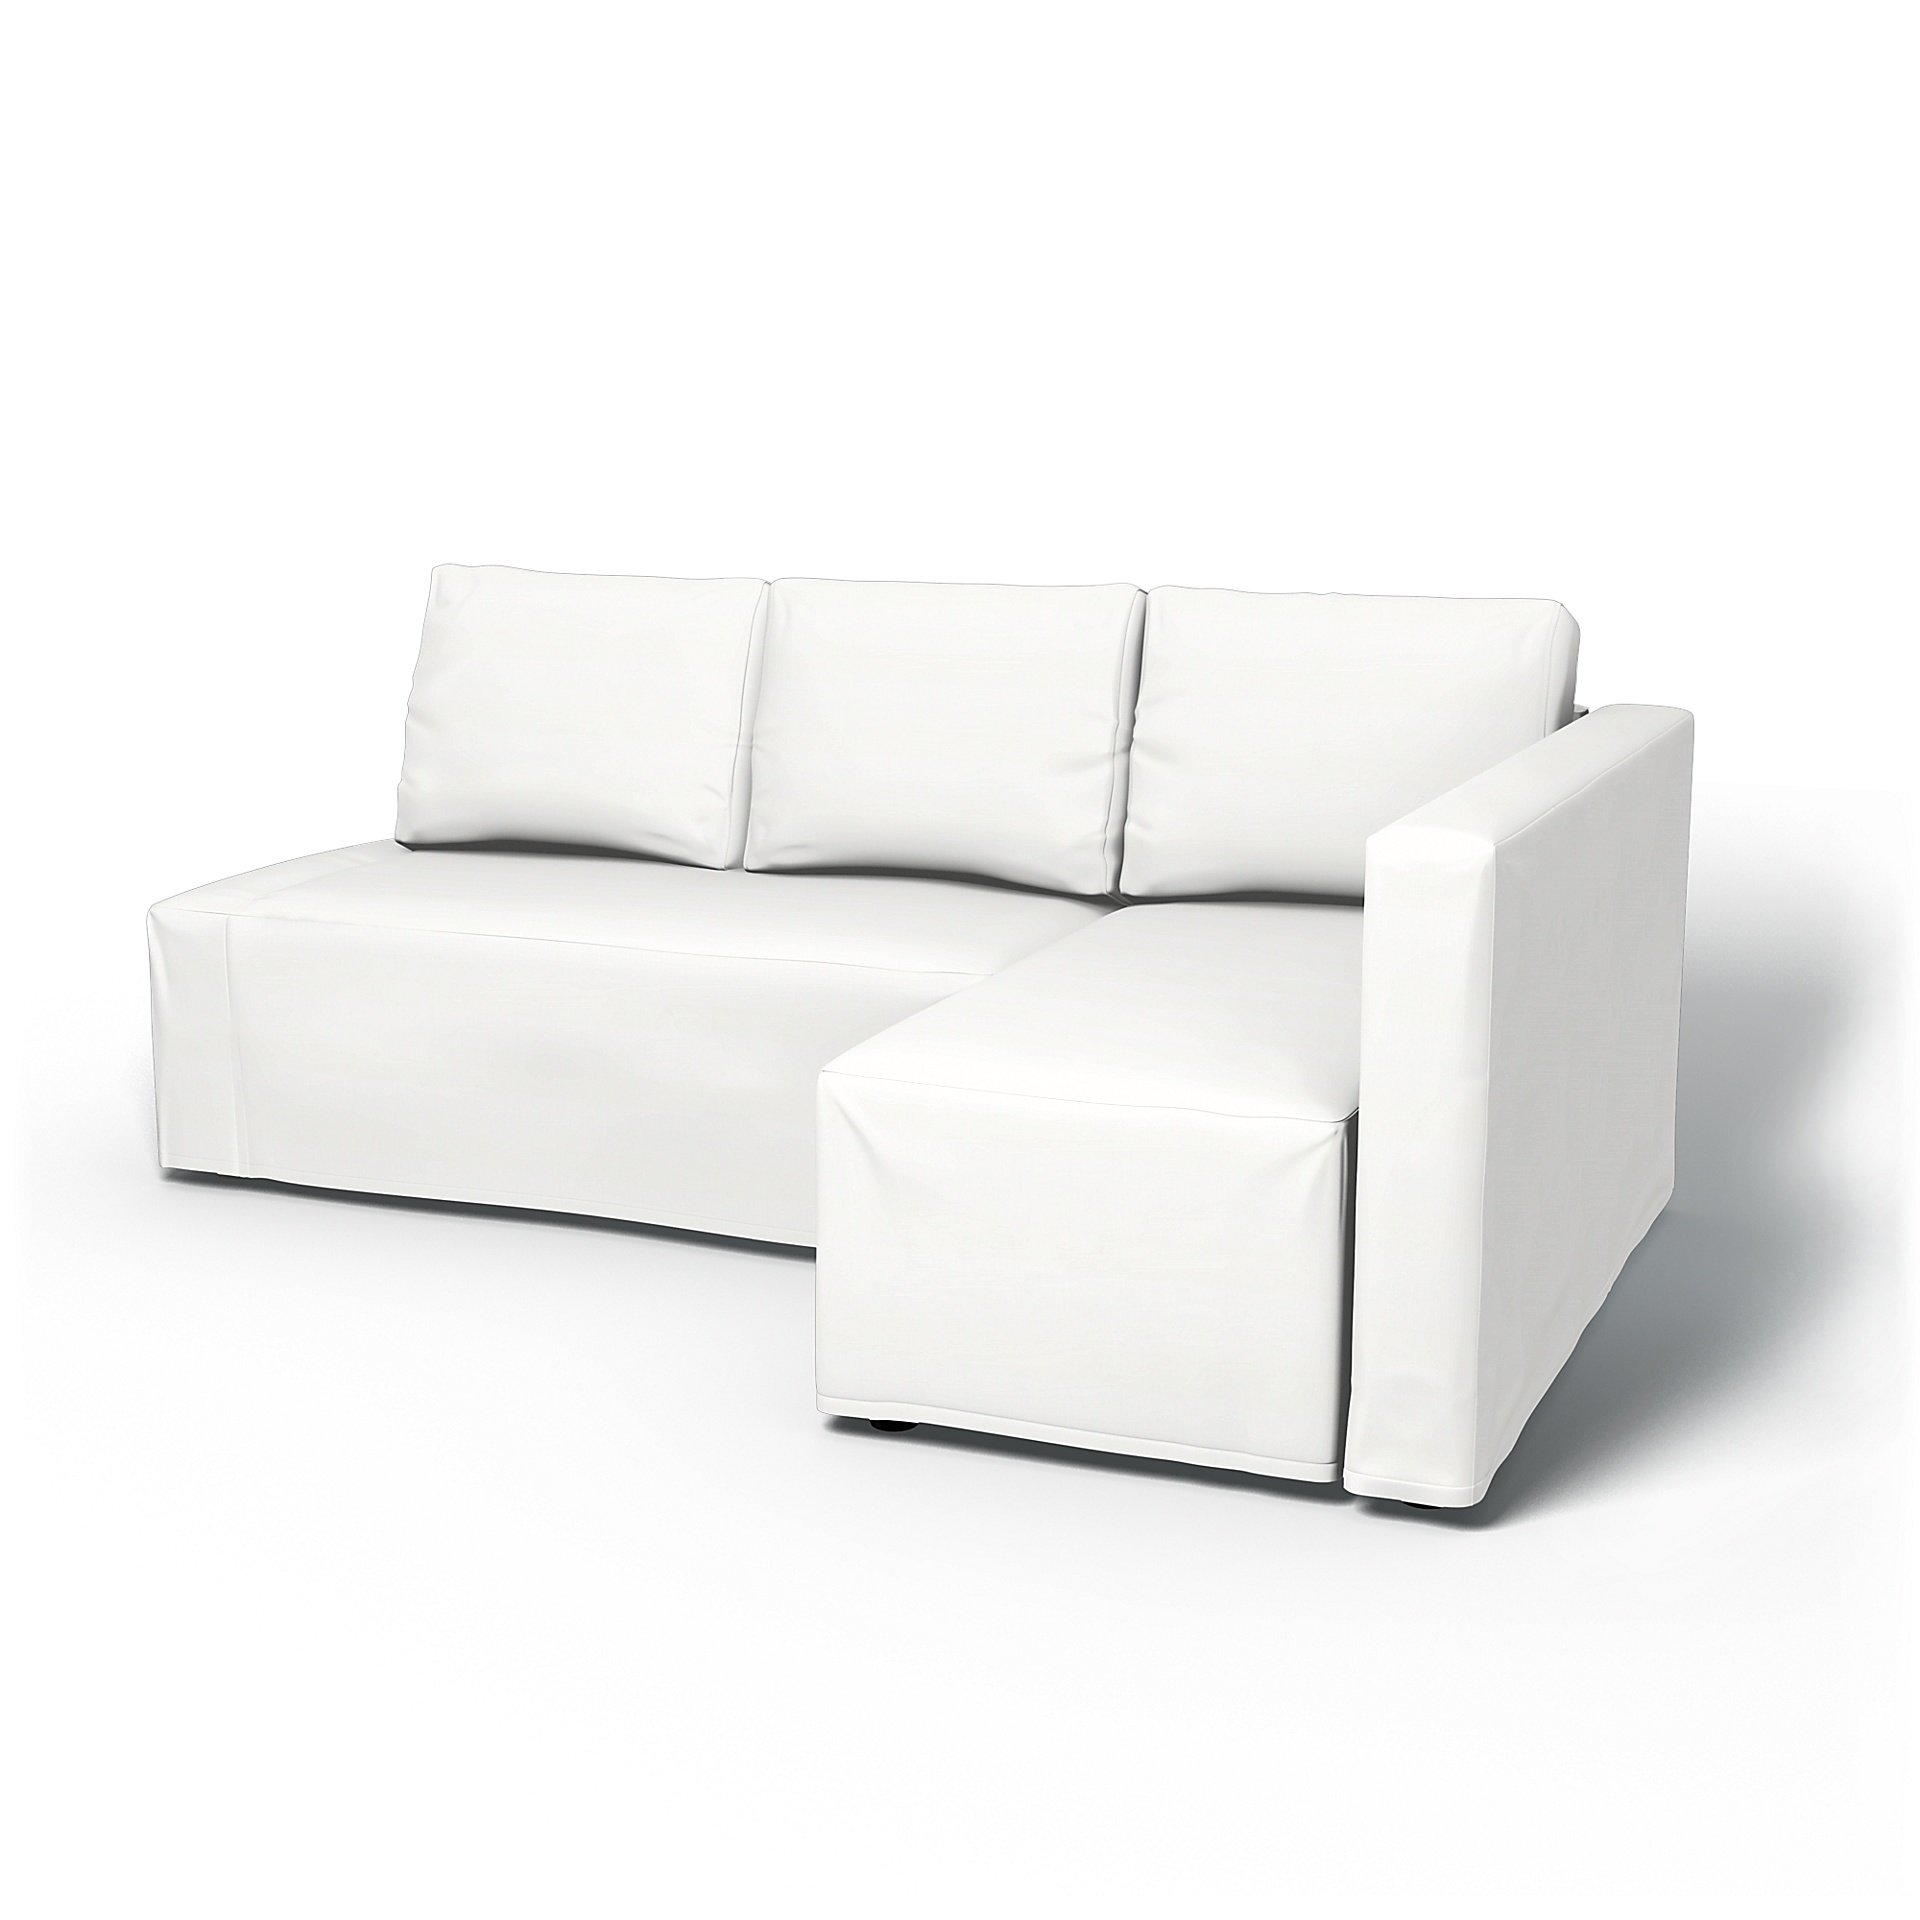 IKEA - Friheten Sofa Bed with Right Chaise Cover, Absolute White, Linen - Bemz